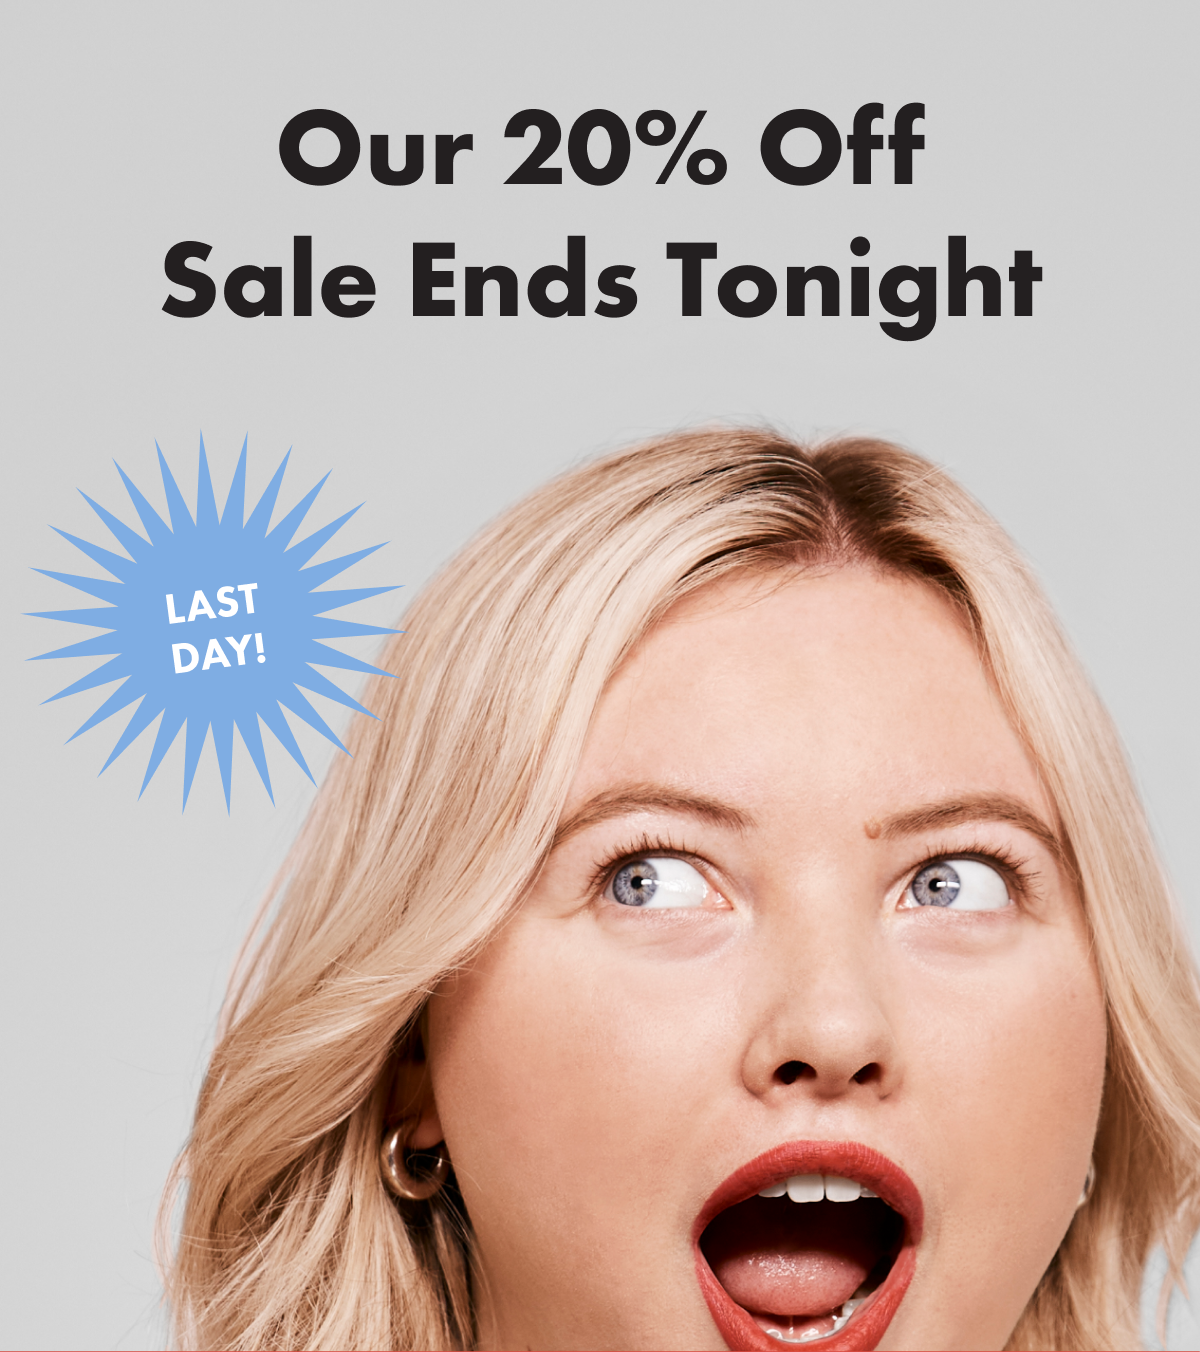 Our 20% Off Sale Ends Tonight